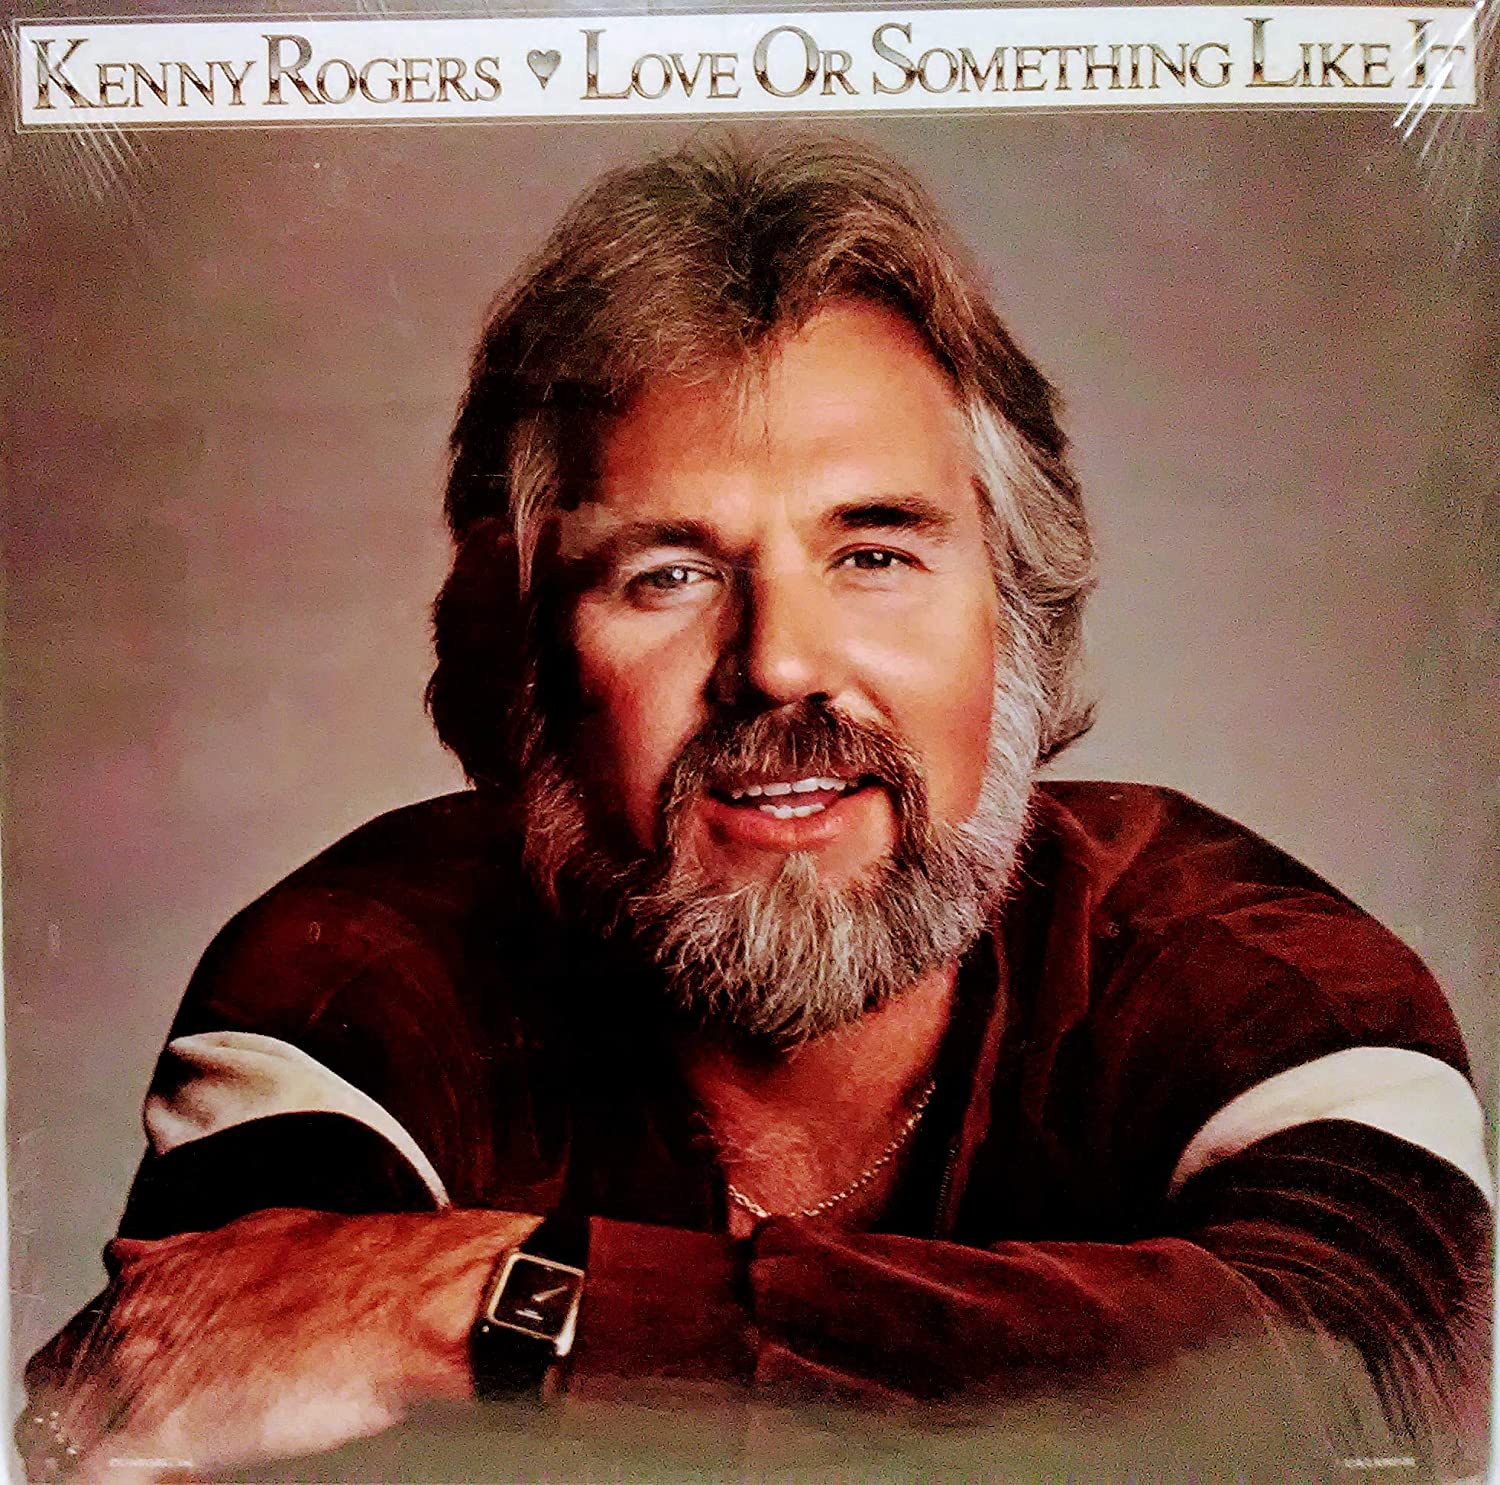 Kenny Rogers - Love Or Something Like It Album Cover